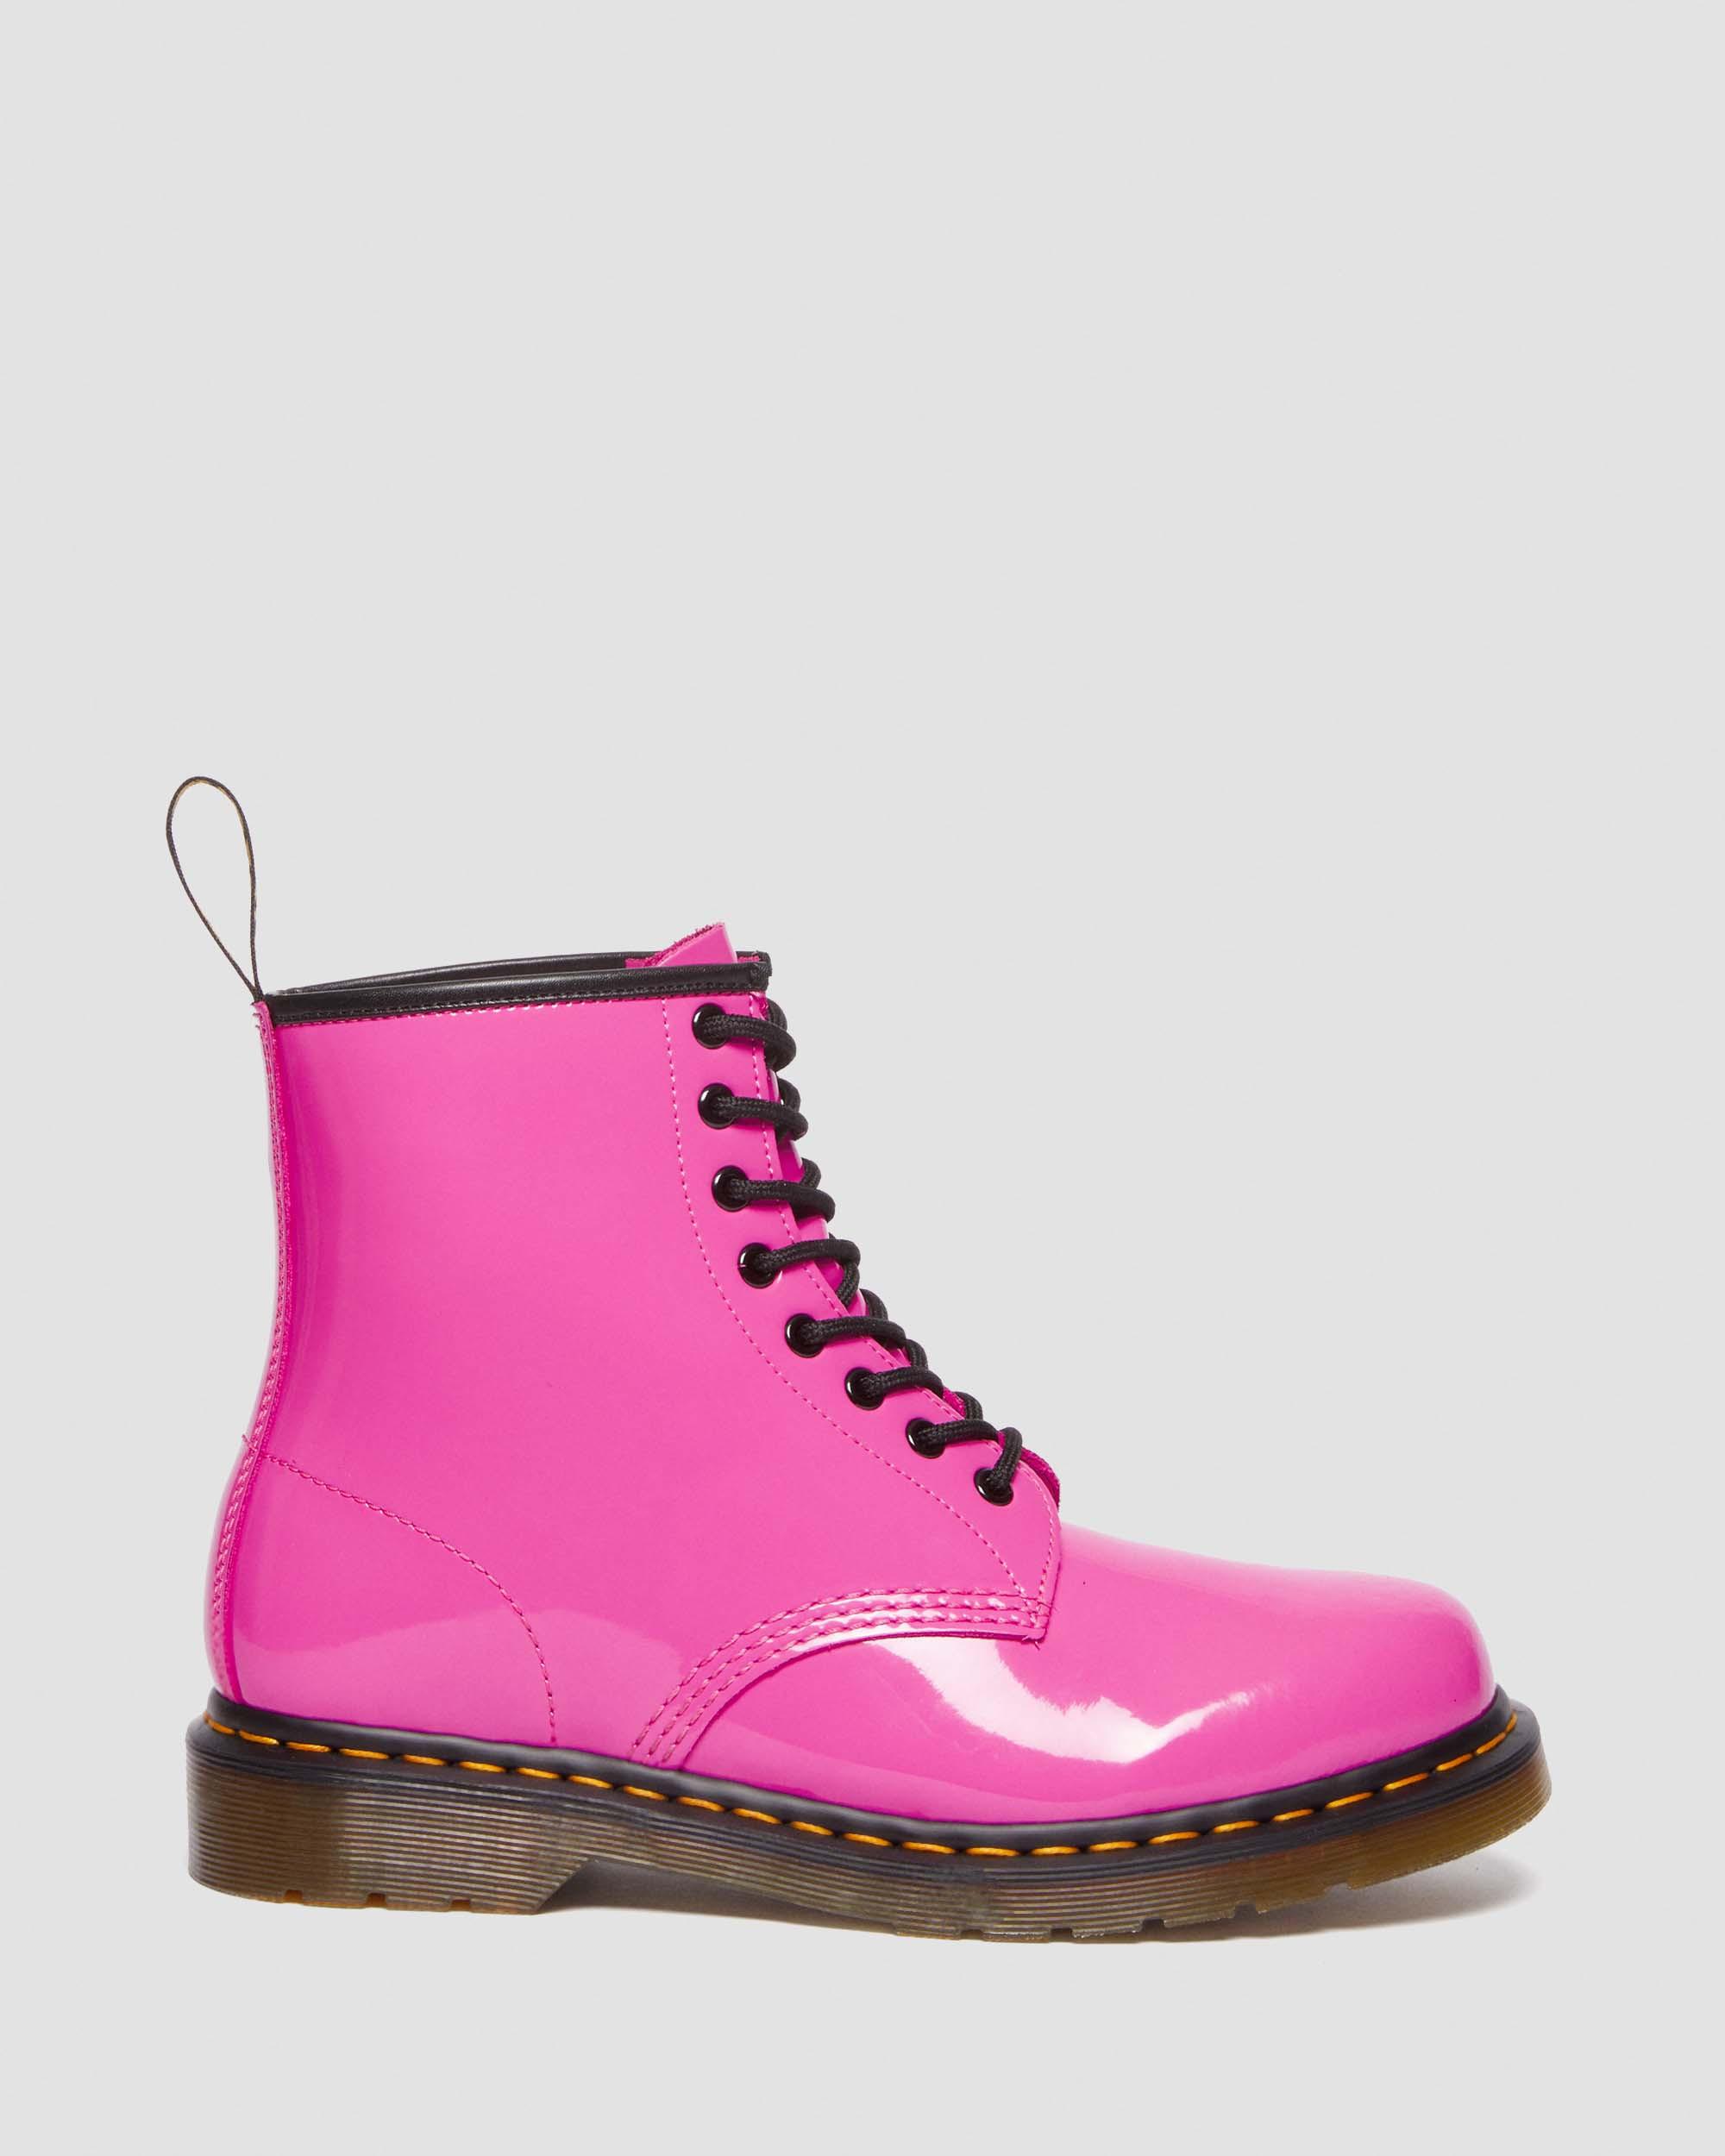 1460 Women's Patent Leather Lace Up Boots in Thrift Pink | Dr. Martens